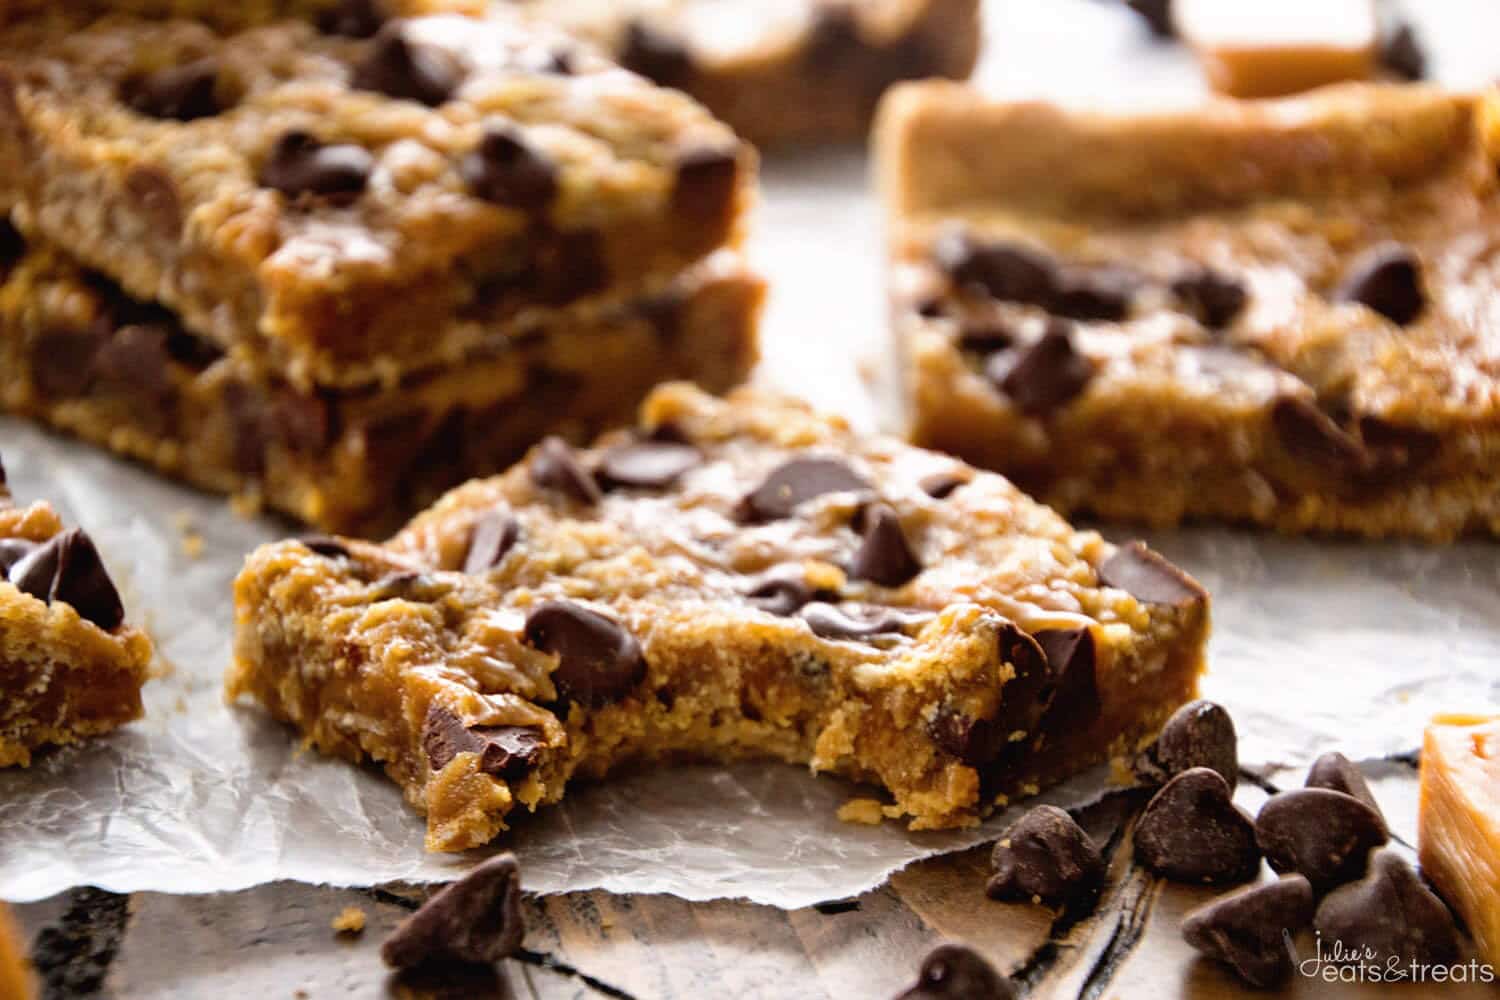 Caramel Oatmeal Bars ~ These Oatmeal Bars Have a Delicious, Ooey, Gooey Layer of Caramel and Sweet Chocolate Chips! Quick, Easy Dessert for Anyone!